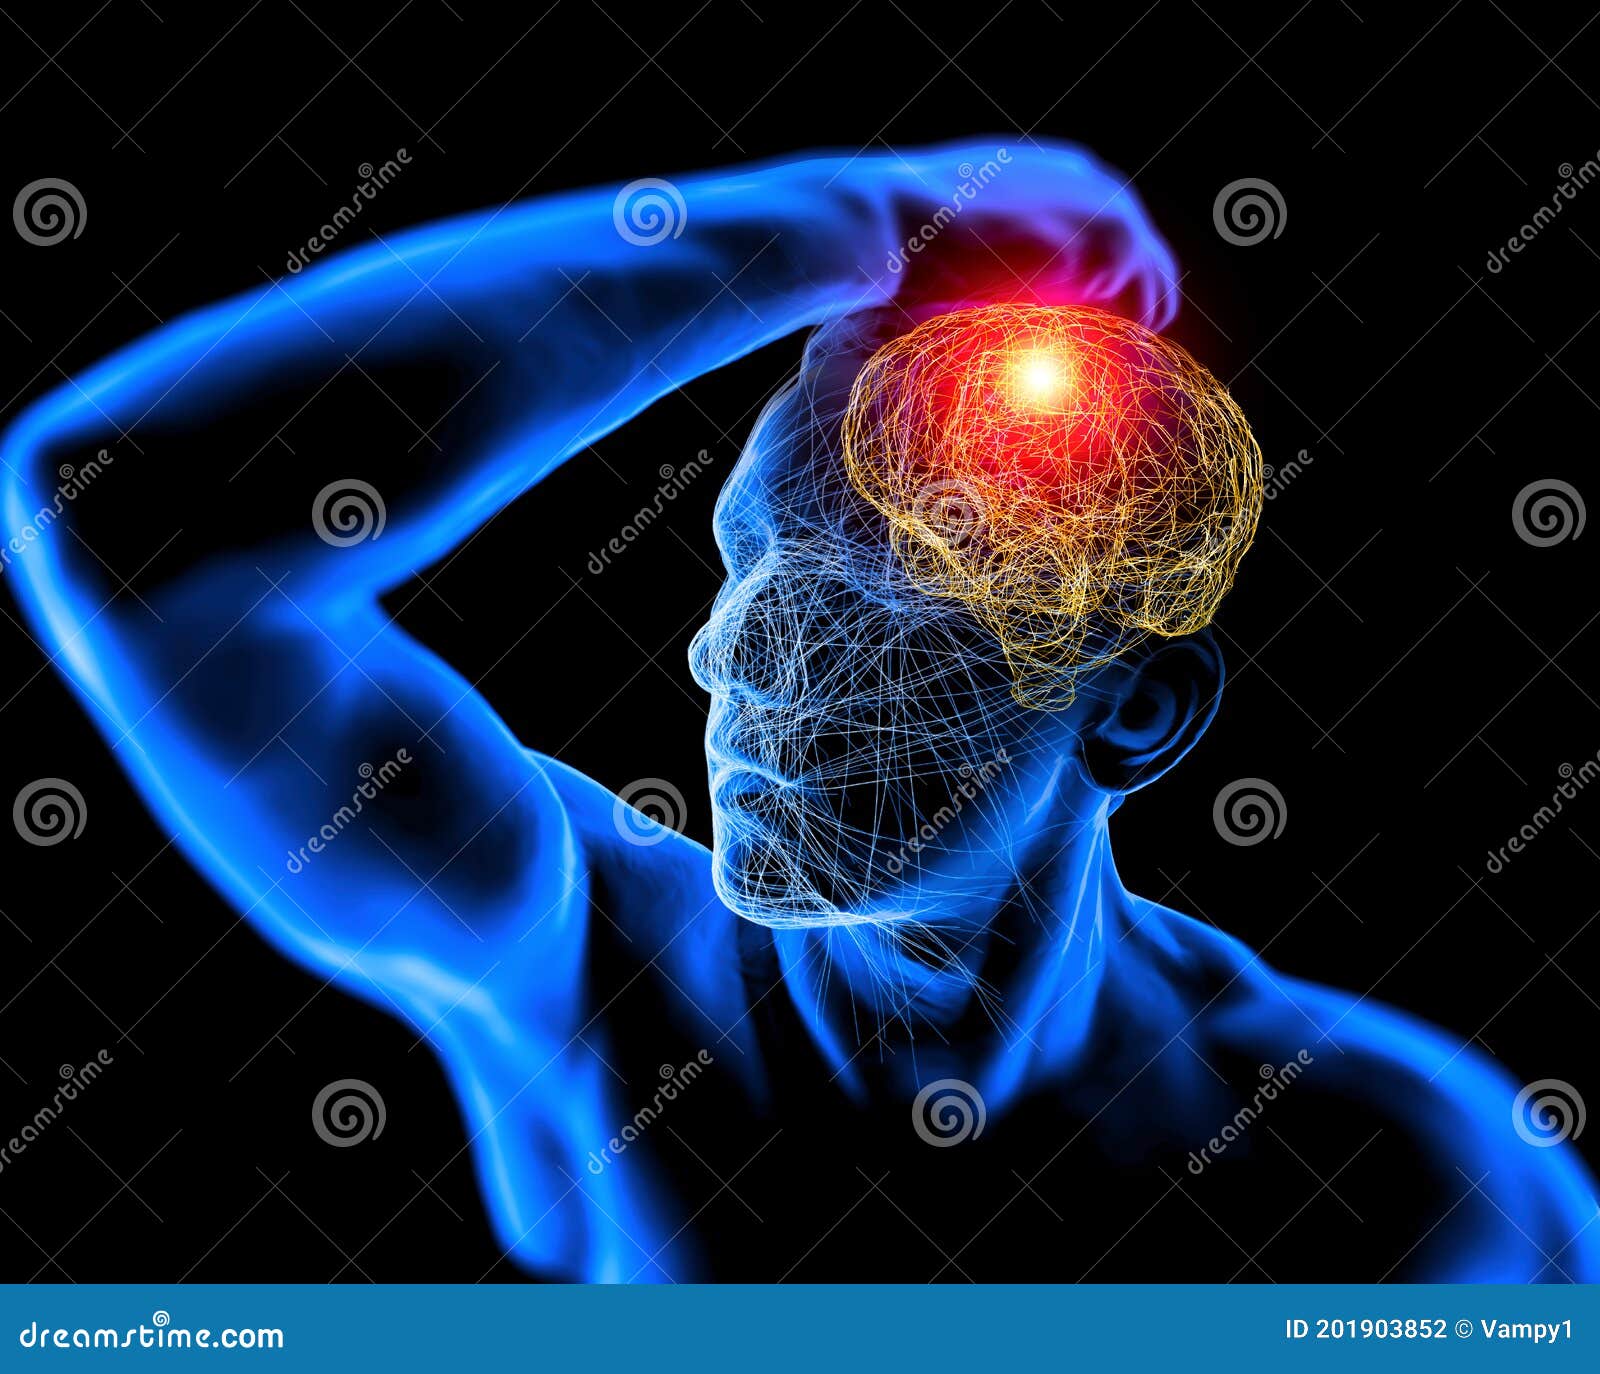 man with headache, pain in the back of the head